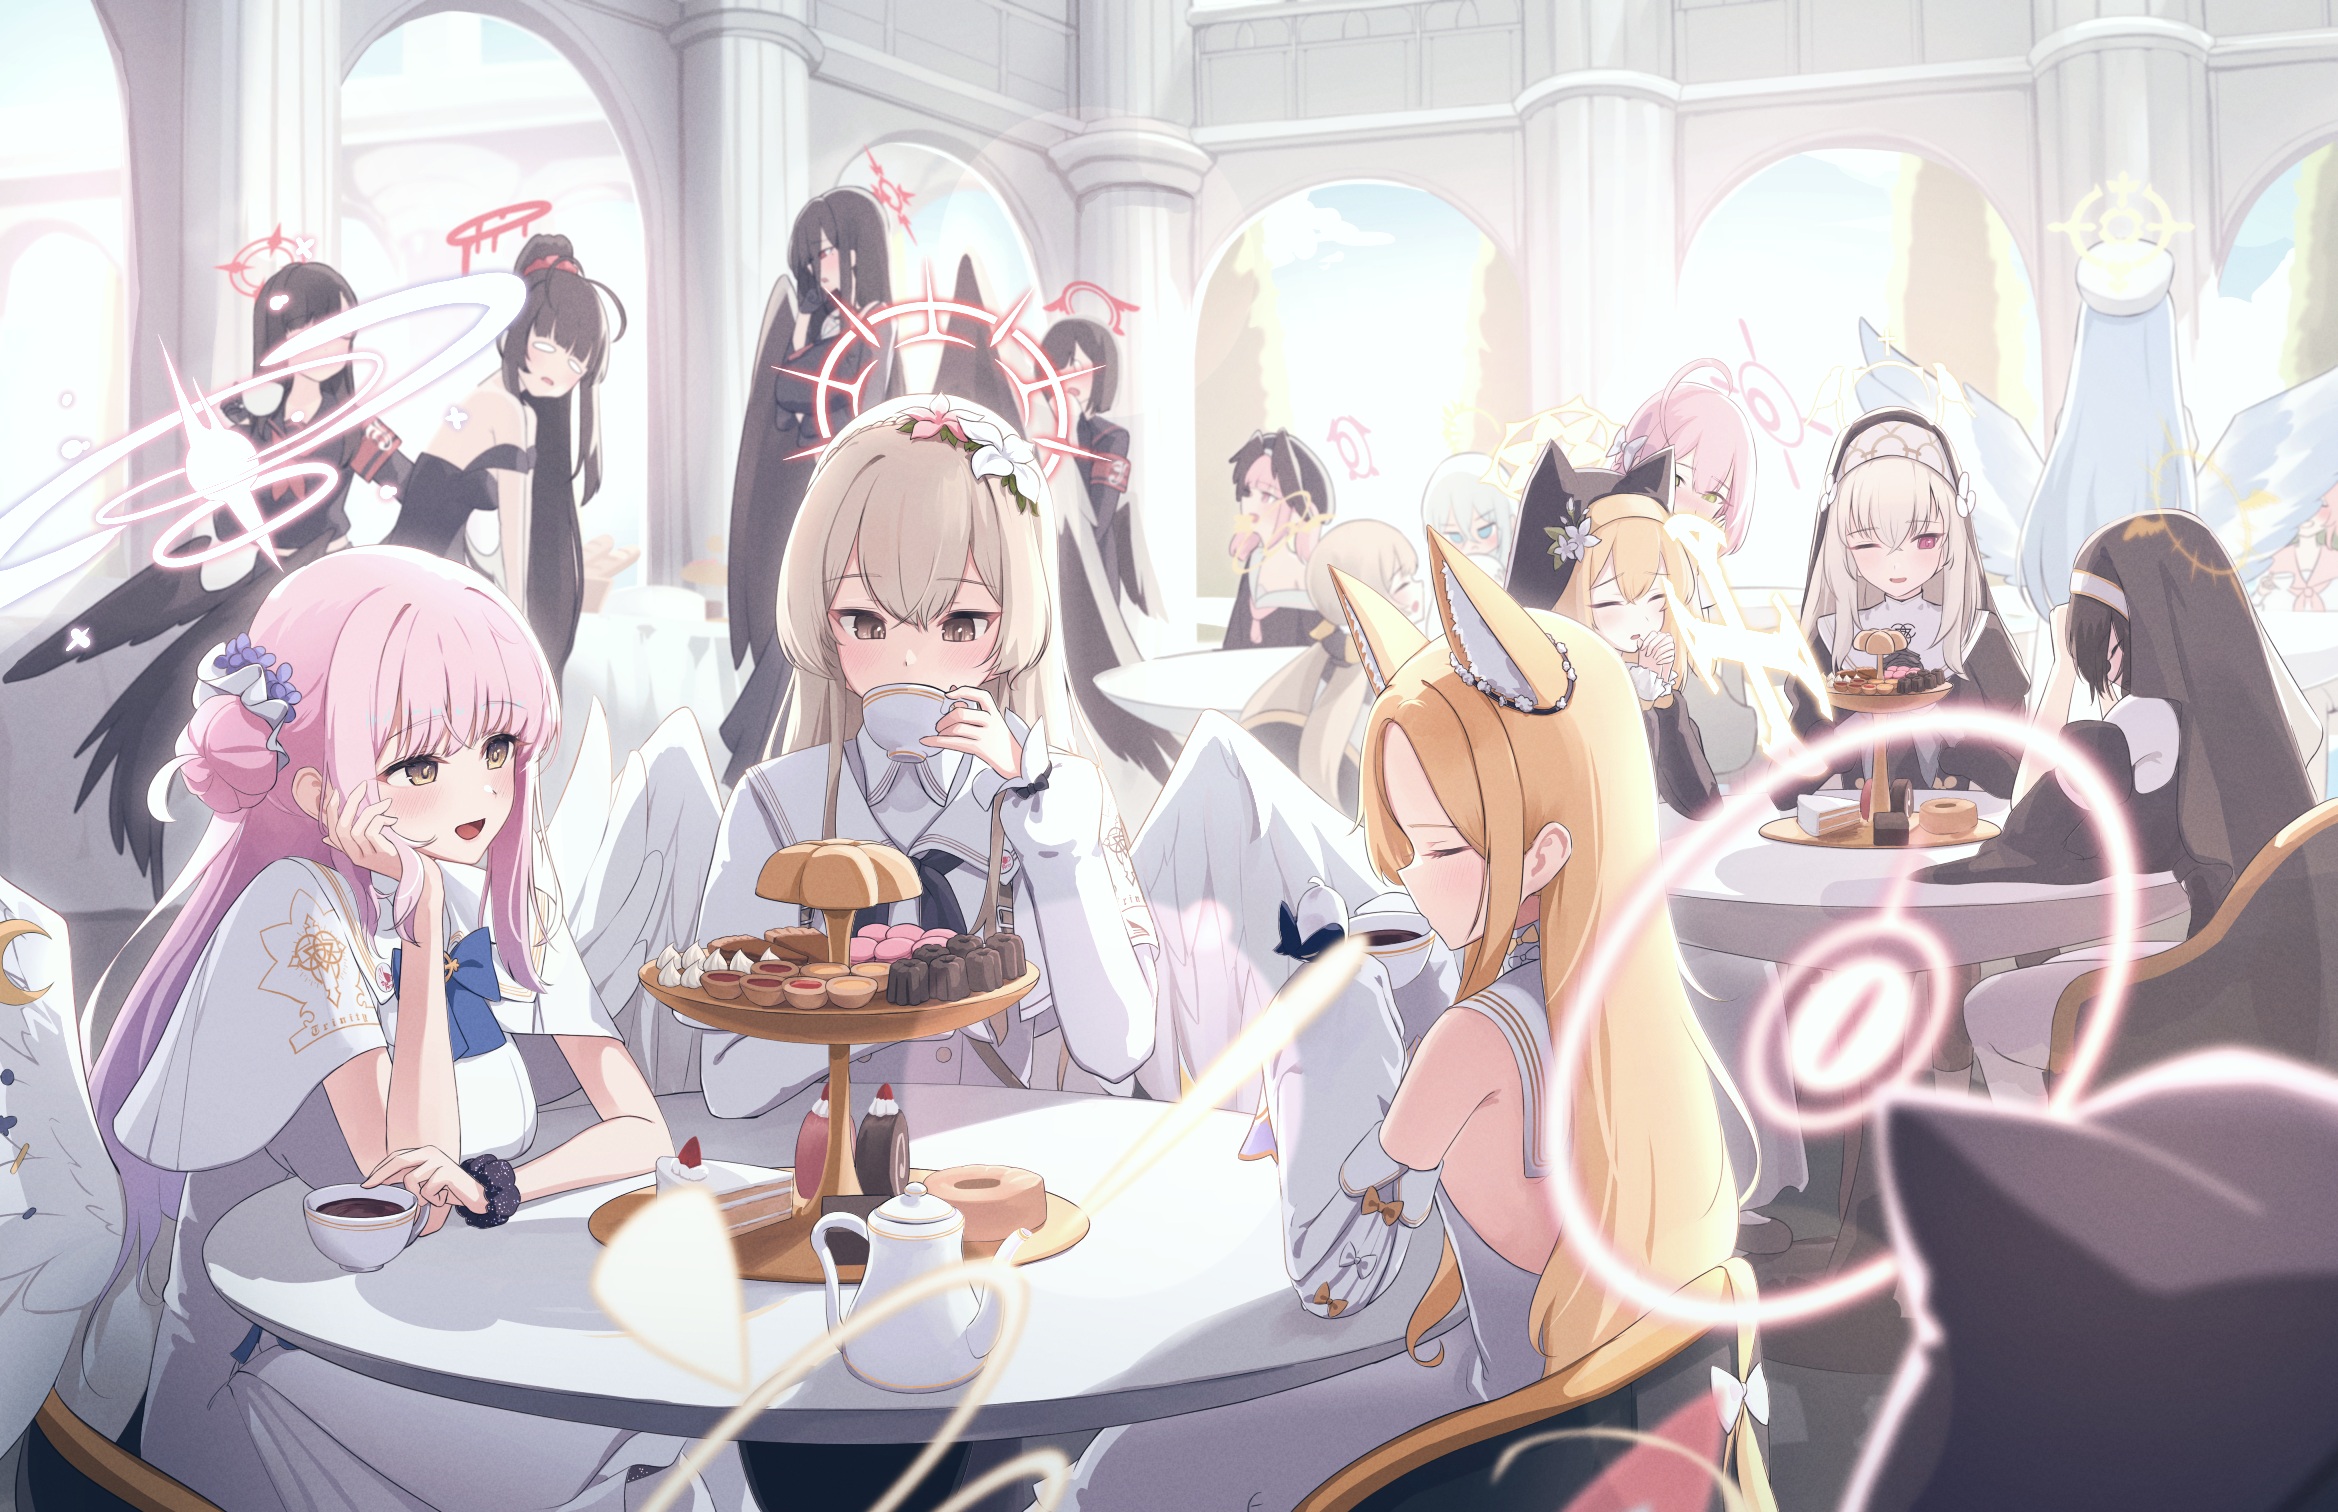 Anime Anime Girls Blue Archive Sitting Table Cup Drink Sweets Wings Nuns Nun Outfit Long Hair Hairbu 2338x1512